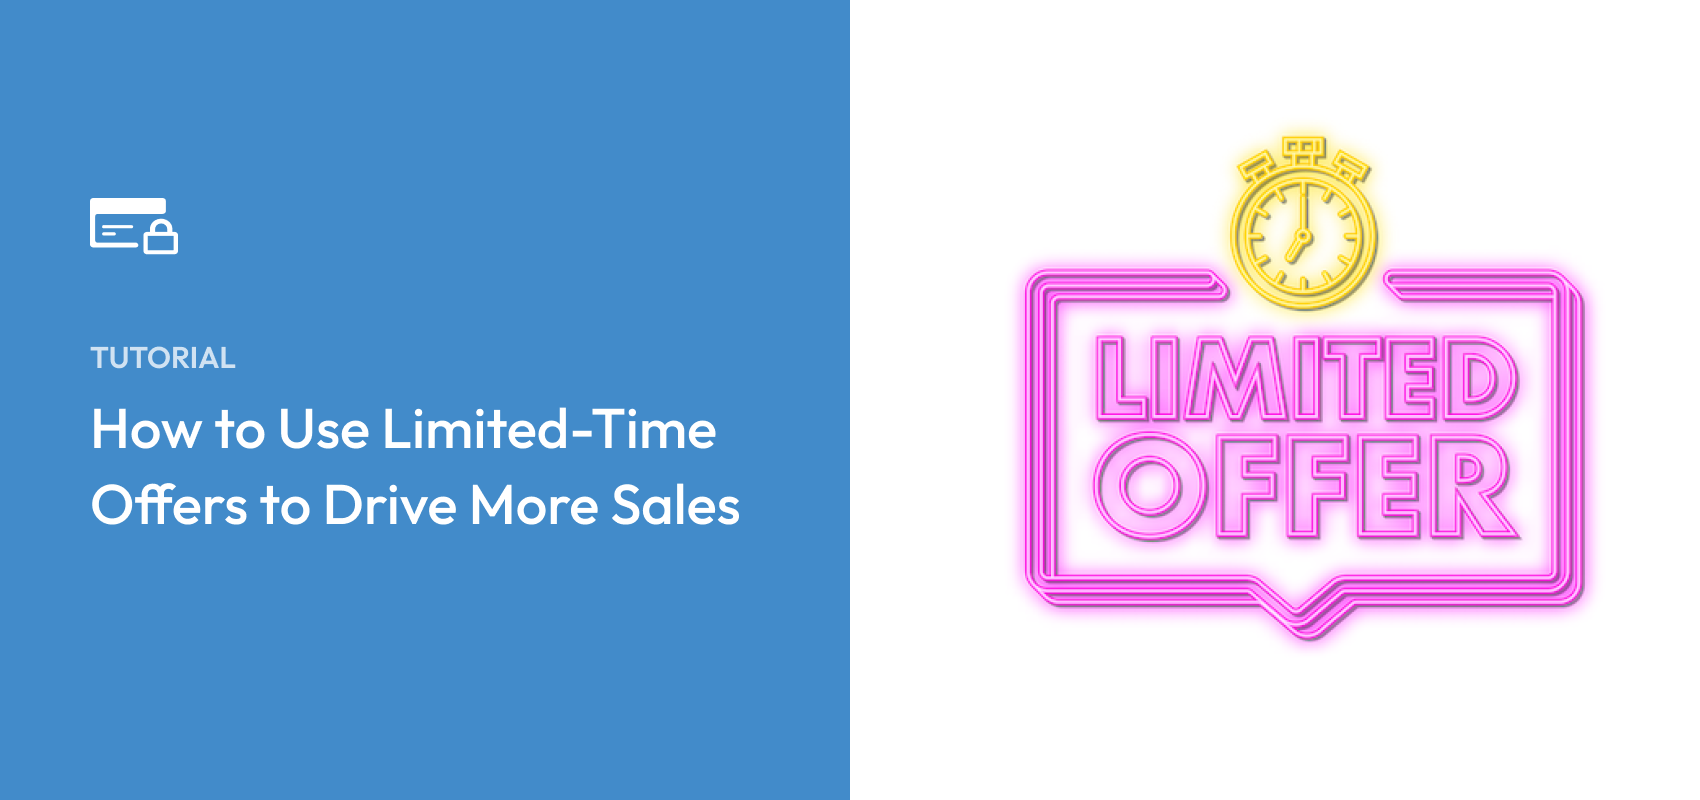 How to Make a Limited Time Offer (While Supplies Last!) Campaign -  OptinMonster